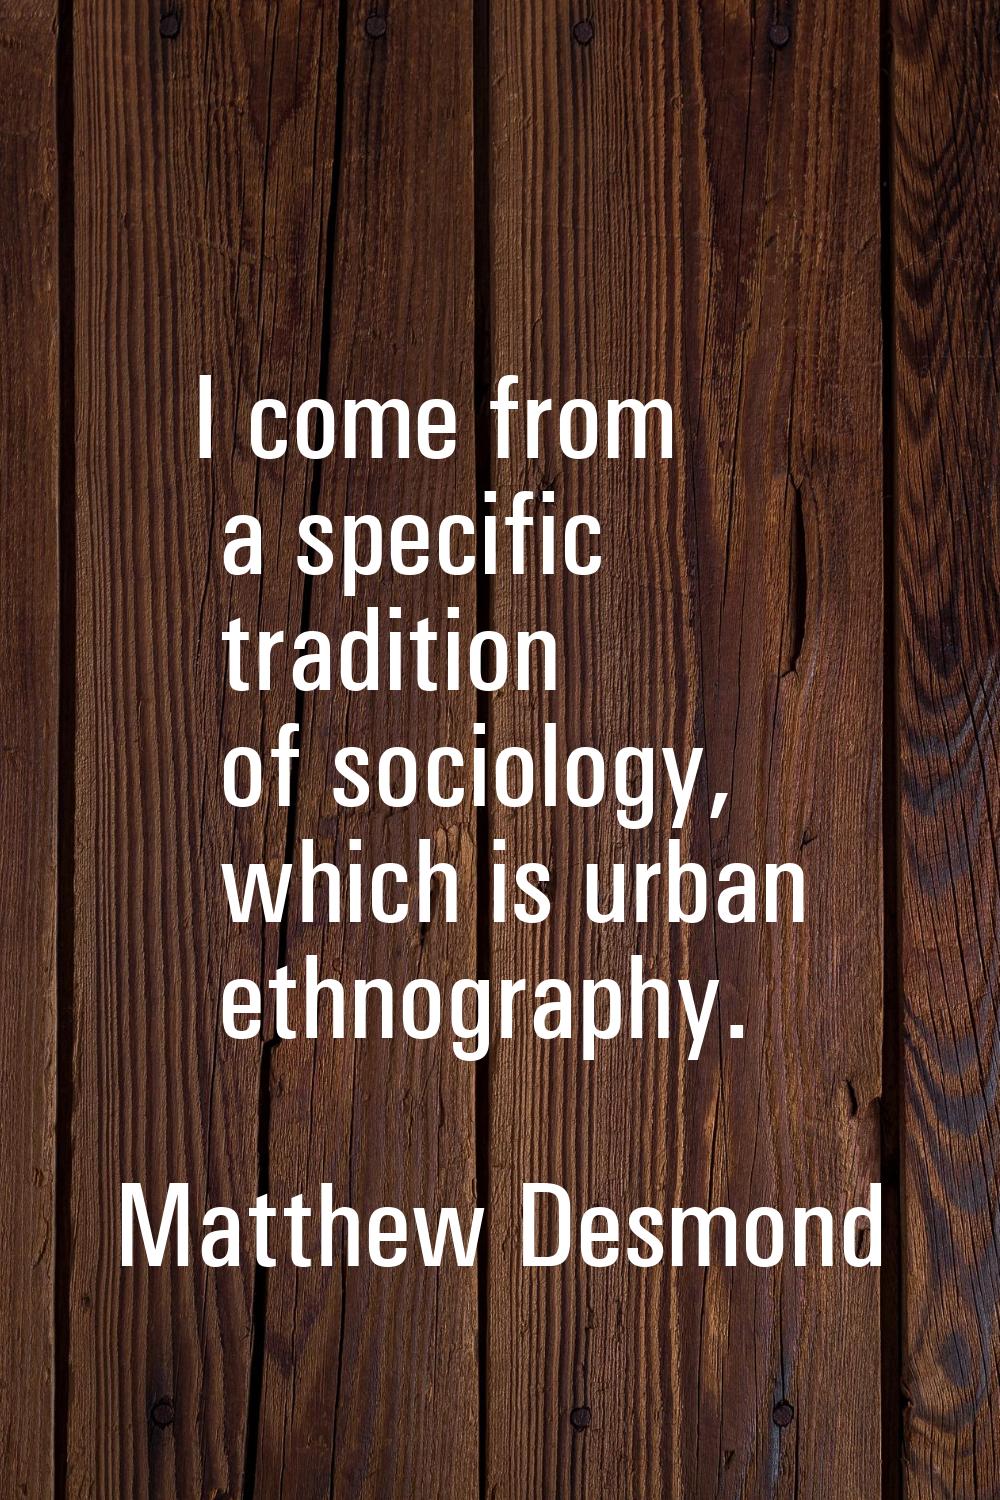 I come from a specific tradition of sociology, which is urban ethnography.